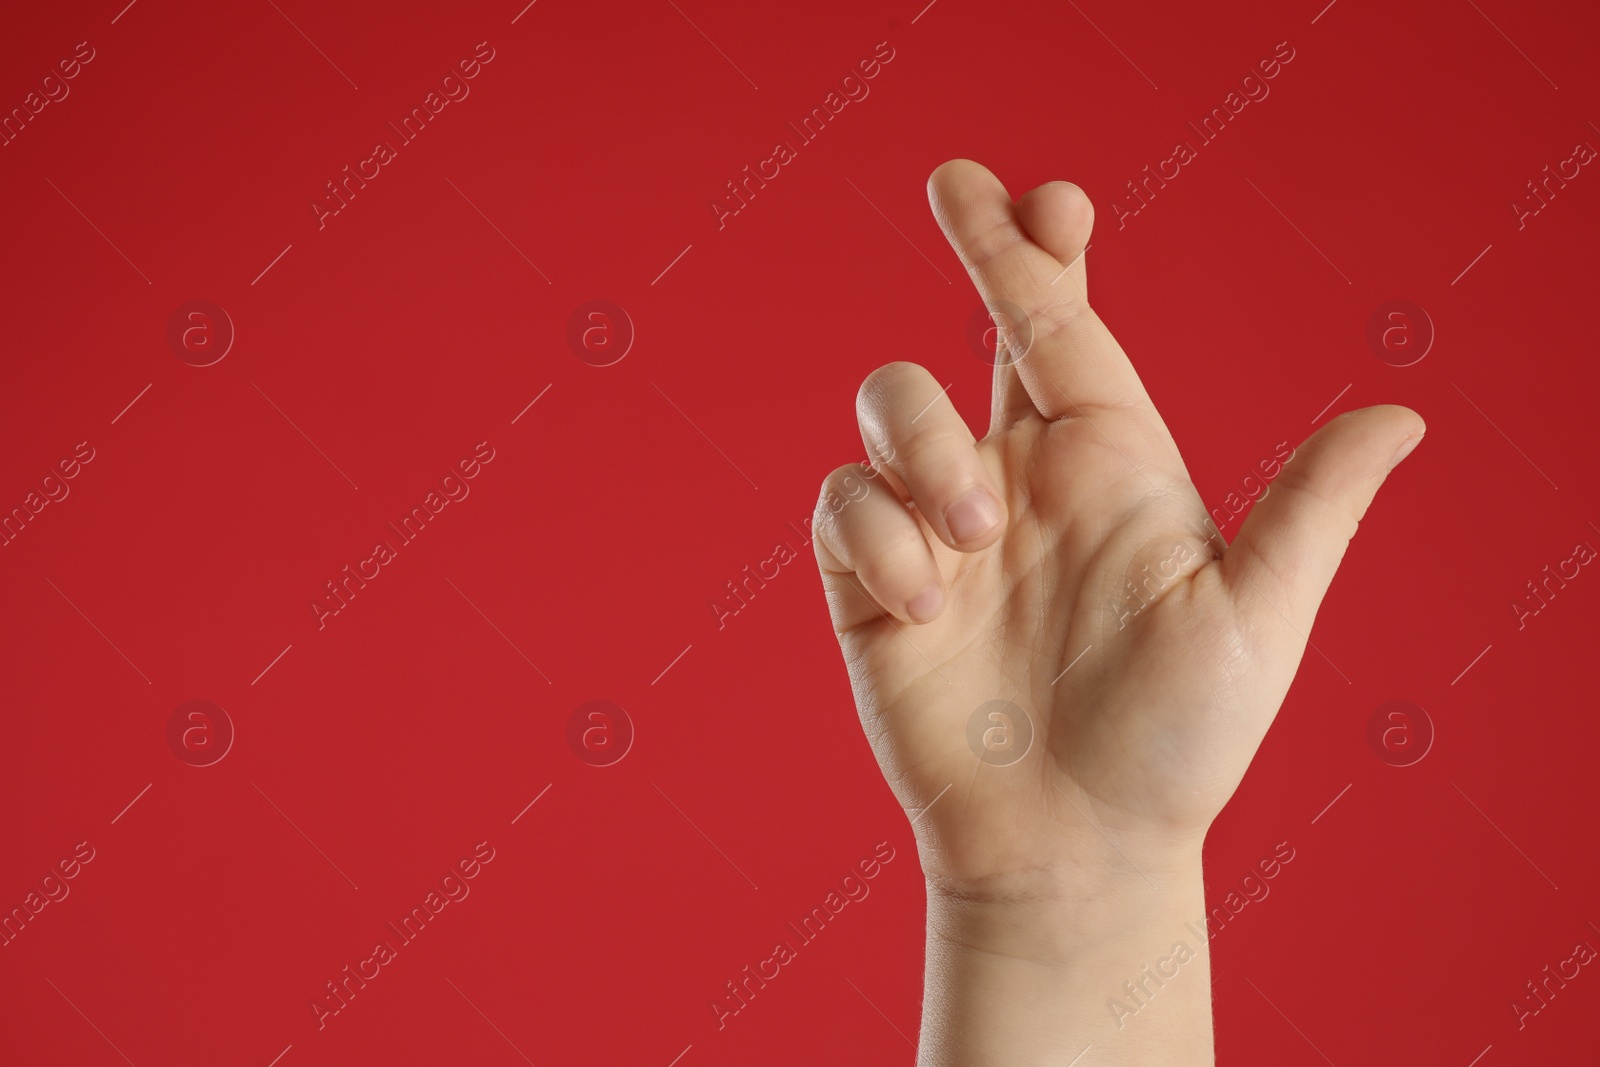 Photo of Child holding fingers crossed on red background, closeup with space for text. Good luck superstition